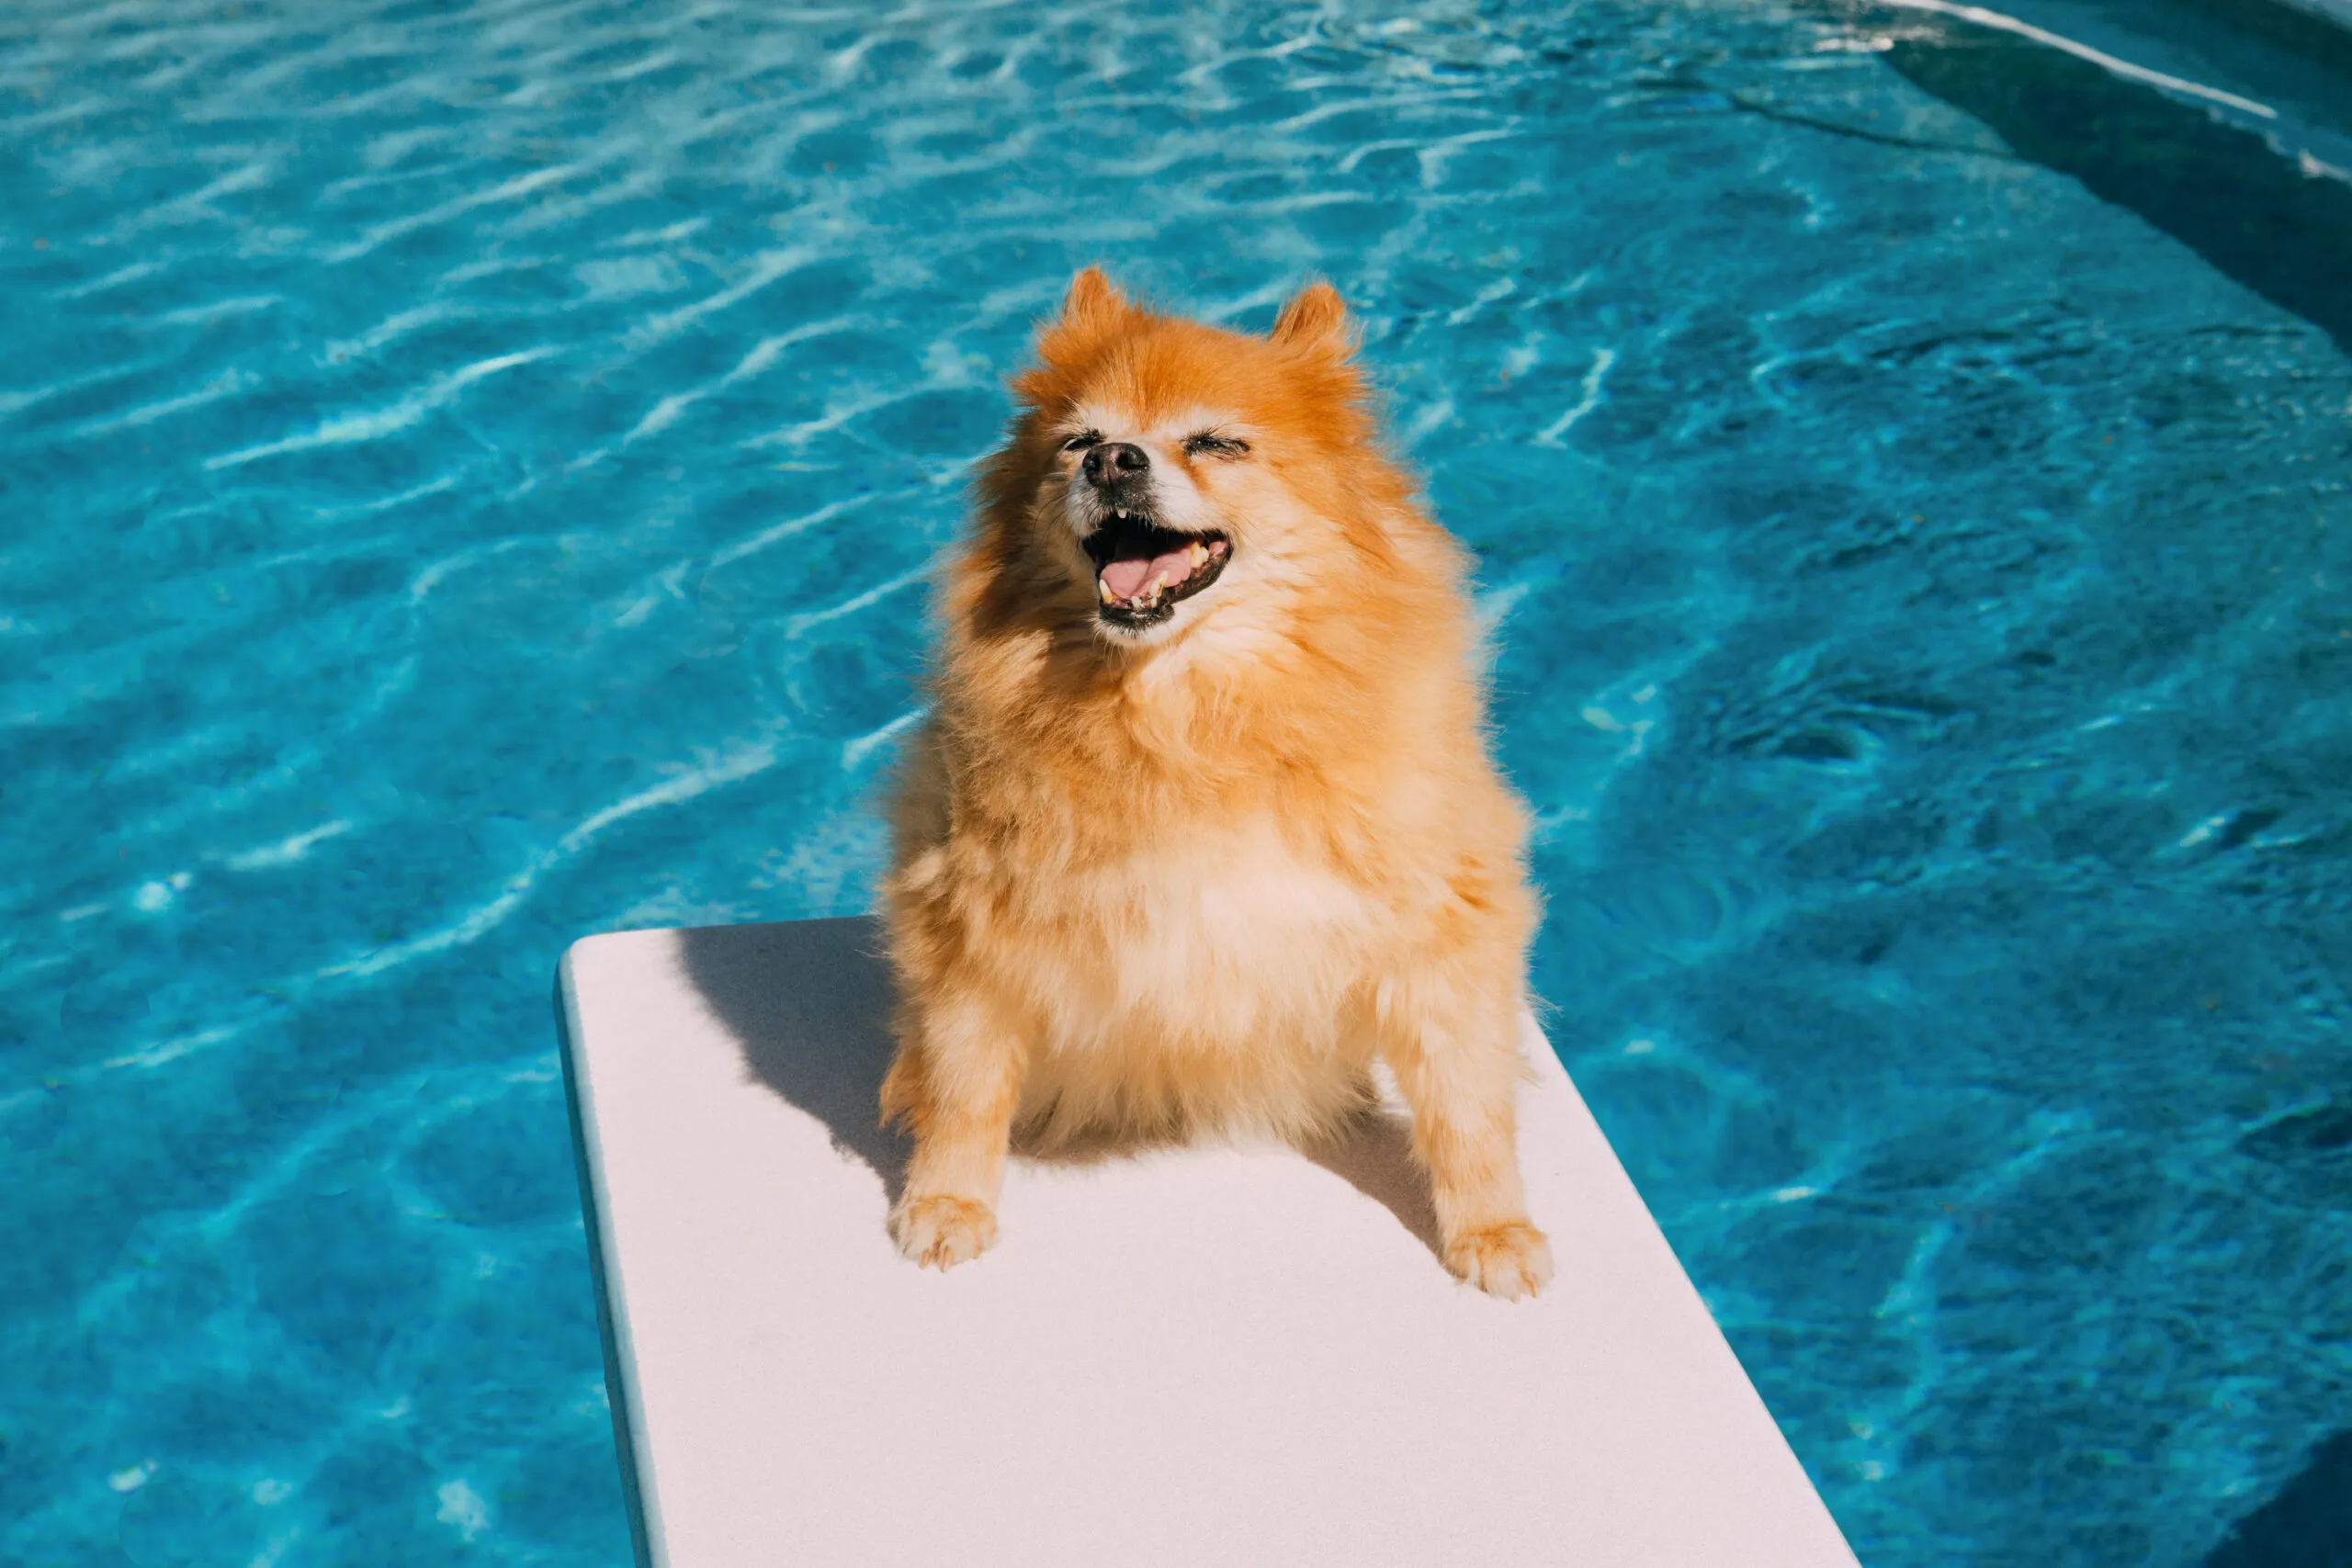 Hot dog summer: happy dog near swimming pool on diving board. Funny dog is a Pomeranian, small dog breed. Conceptual image for vacation, staycation, heat exhaustion, or "dog days of summer." Dog outdoors is panting but appears to be smiling and having summertime fun.